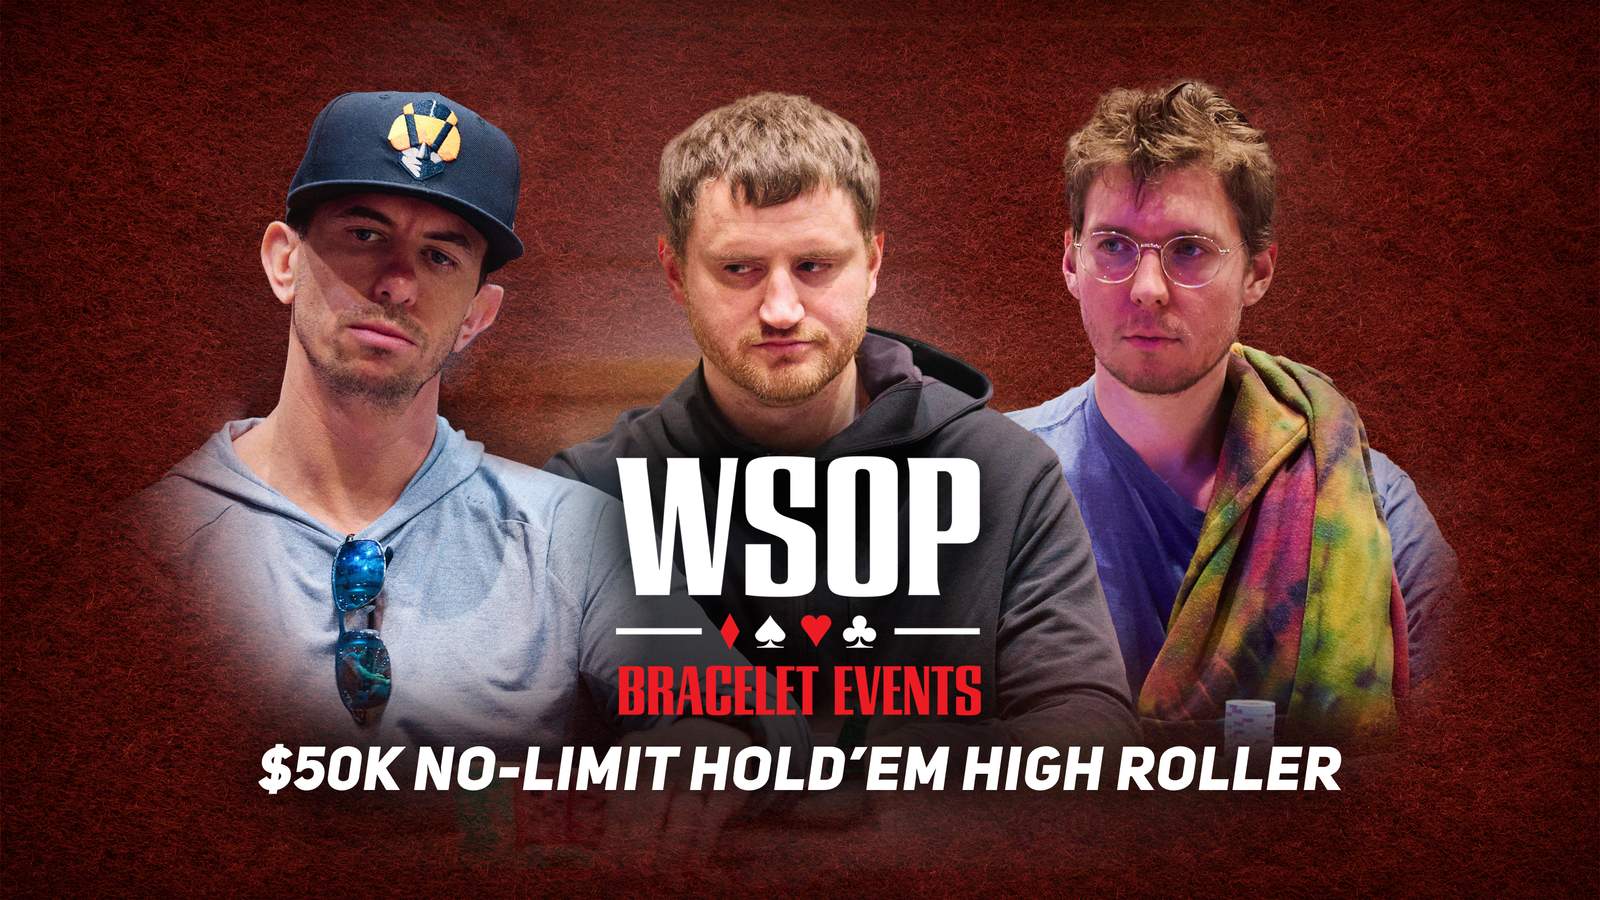 Watch the WSOP Event #12: $50K No-Limit Hold'em High Roller Final Table on PokerGO.com at 7 p.m. ET